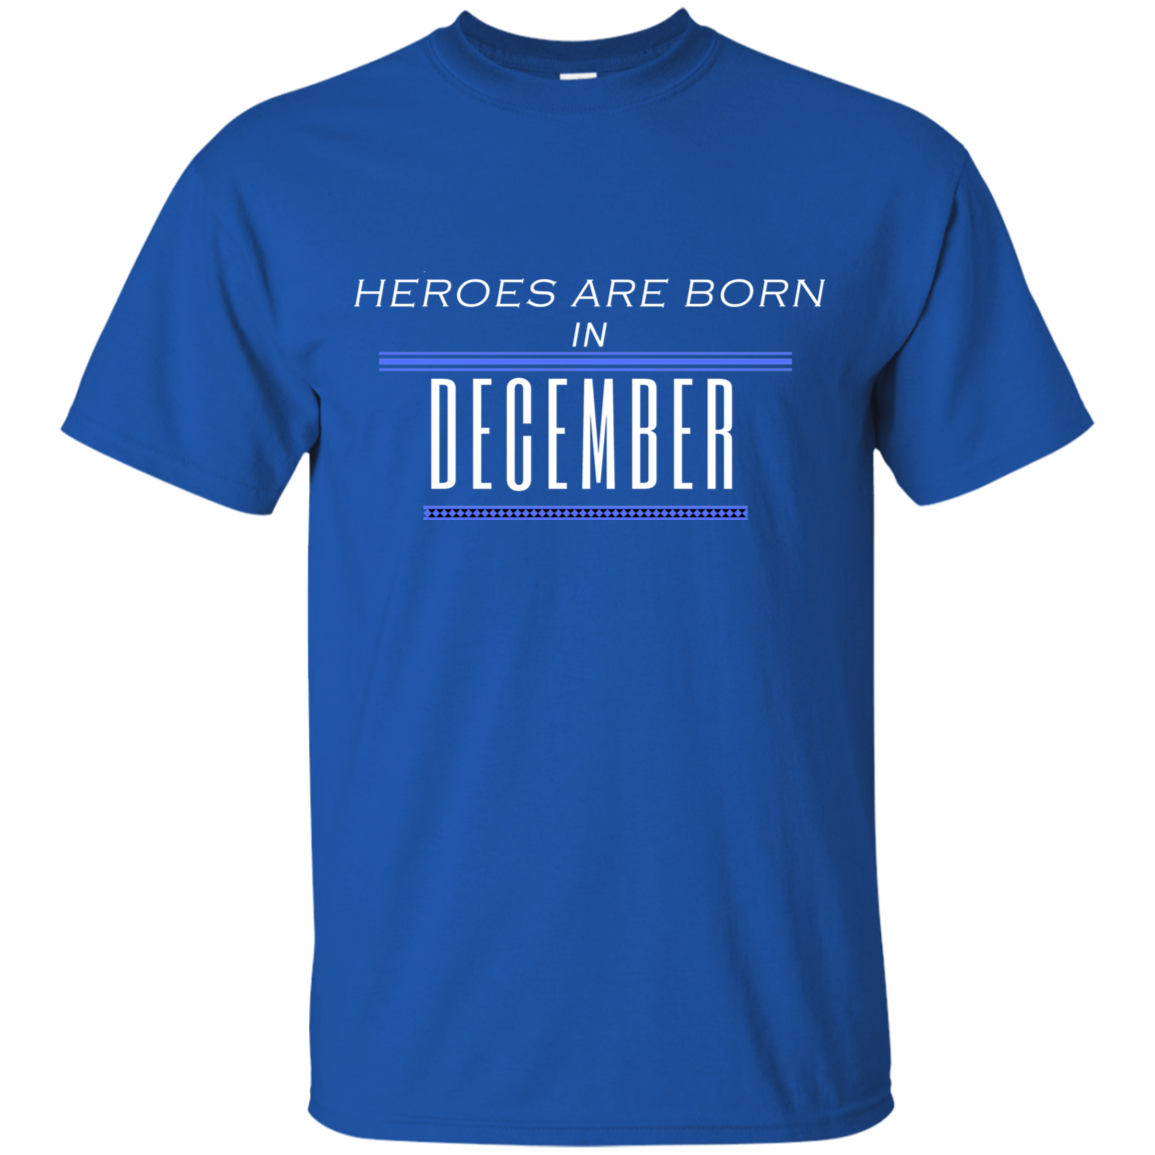 Heroes Are Born in December